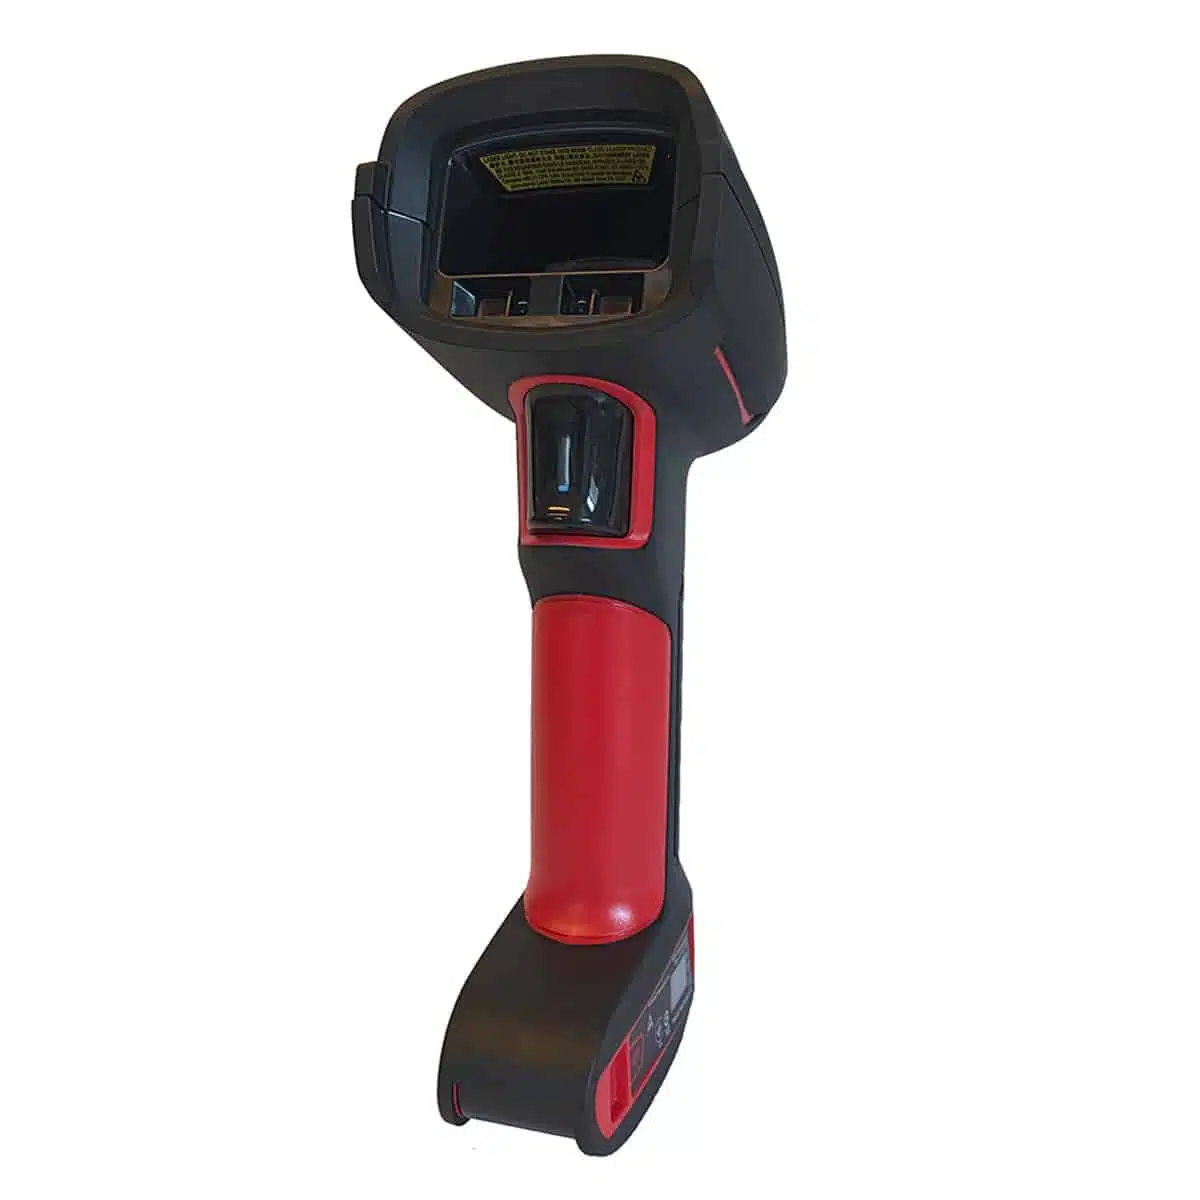 Honeywell Granit XP 1990iXLR (Bluetooth) Kit_Scanner_Industrial_Cordless scanner only photo